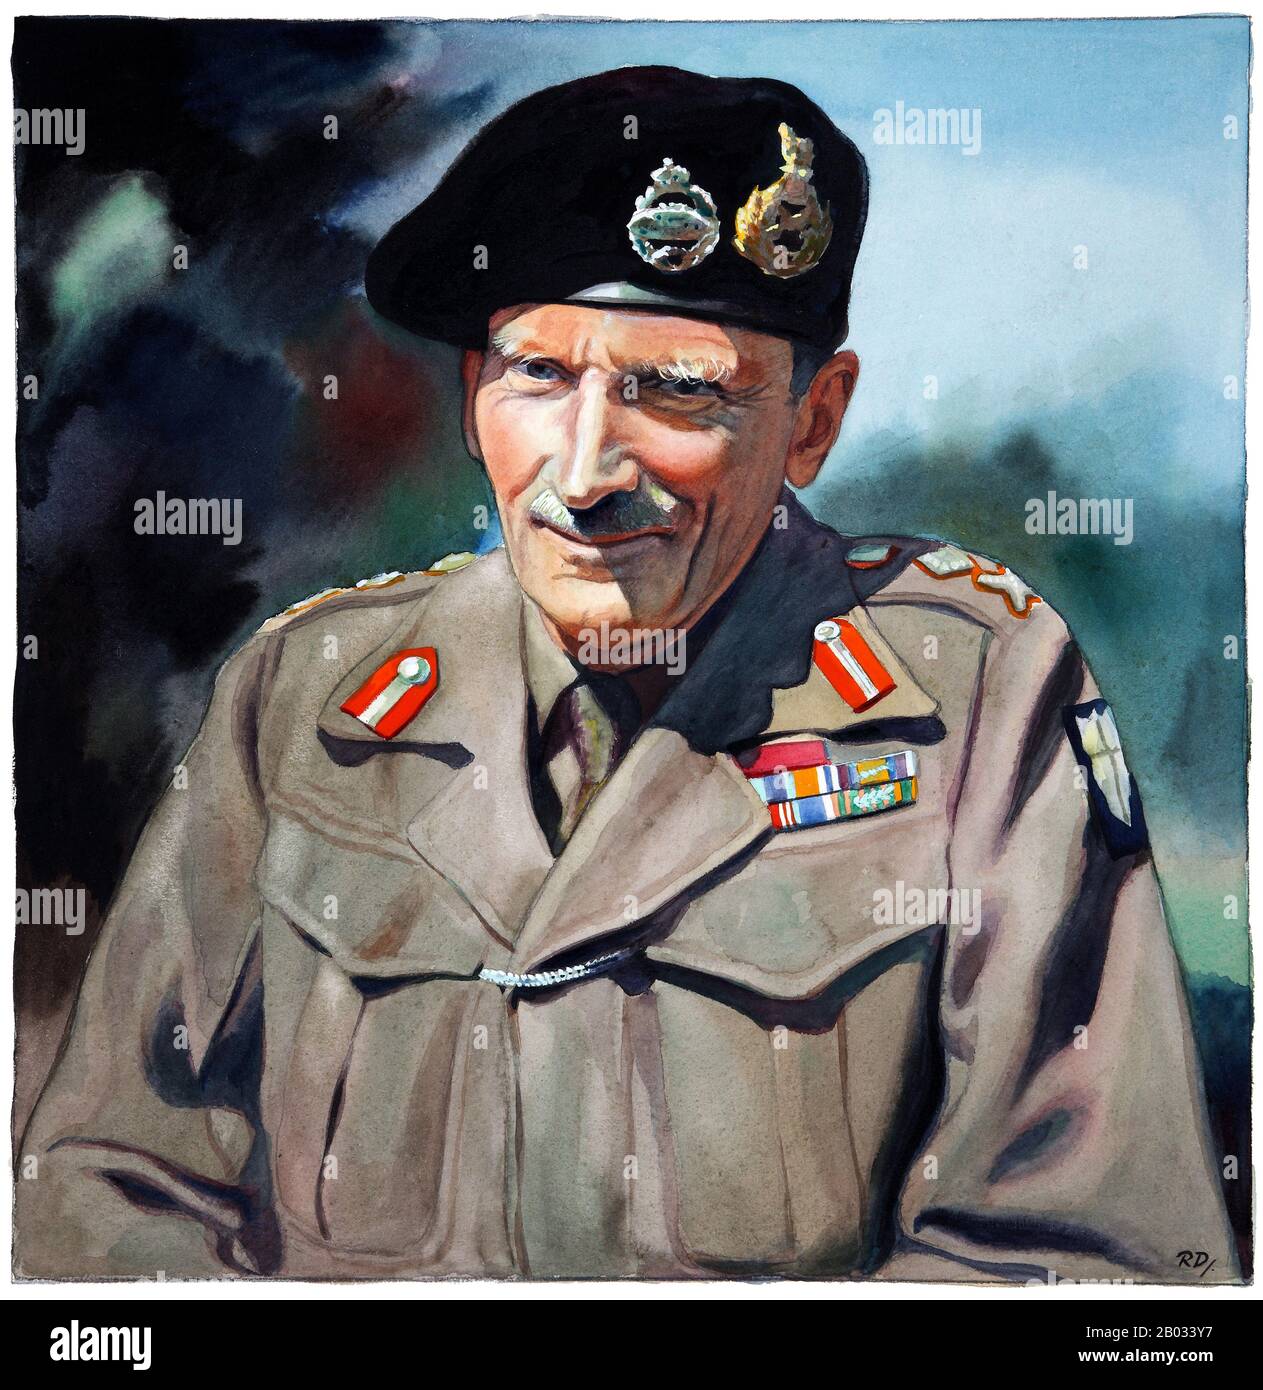 The Second Battle of El Alamein (23 October–11 November 1942) was a major battle of the Second World War that took place near the Egyptian railway halt of El Alamein.  With the Allies victorious, it marked a major turning point in the Western Desert Campaign of the Second World War.  Field Marshal Bernard Law Montgomery, 1st Viscount Montgomery of Alamein, KG, GCB, DSO, PC (17 November 1887 – 24 March 1976), nicknamed 'Monty' and the 'Spartan General', was a senior officer of the British Army and the victor at El-Alamein. Stock Photo